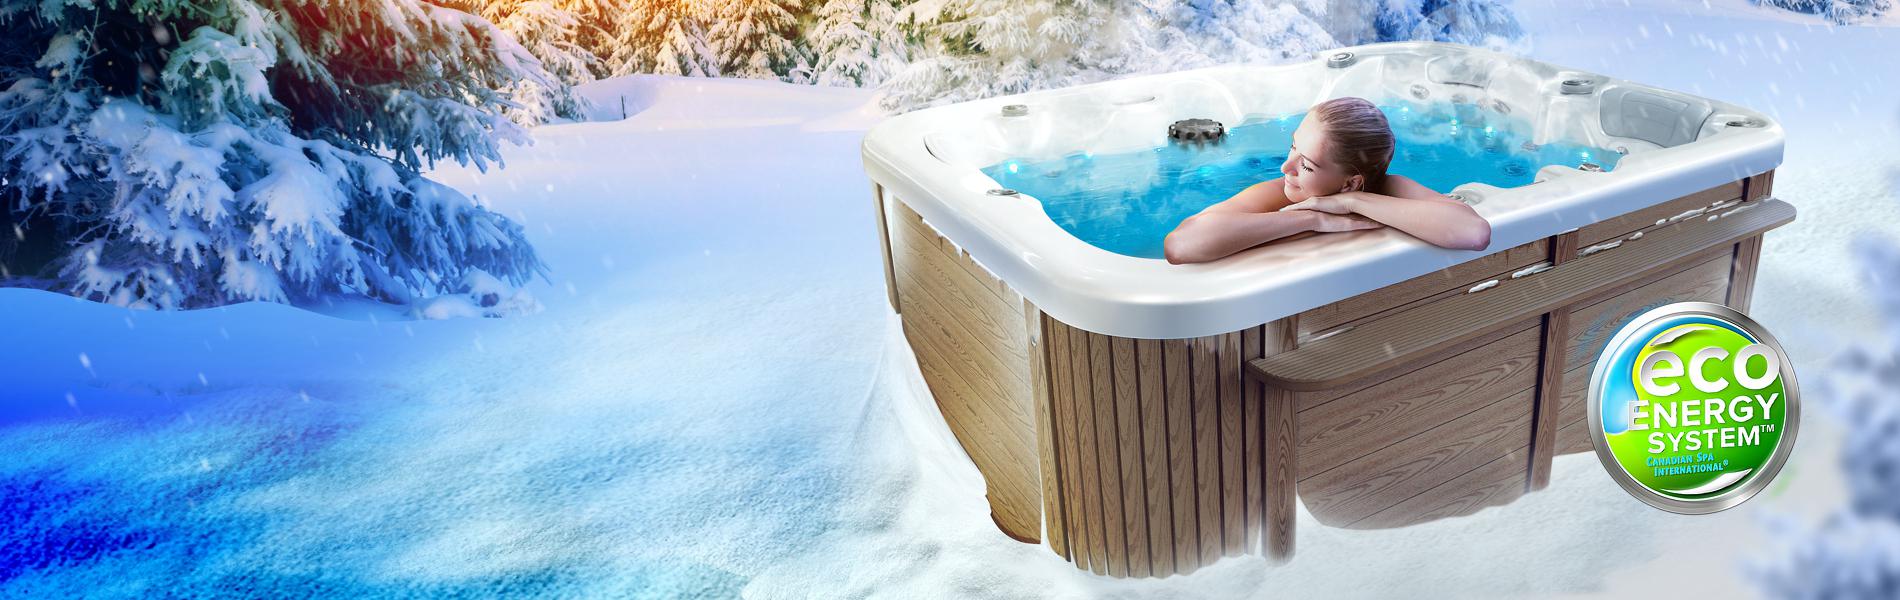 Hot tub outdoor Corall, Canadian Spa